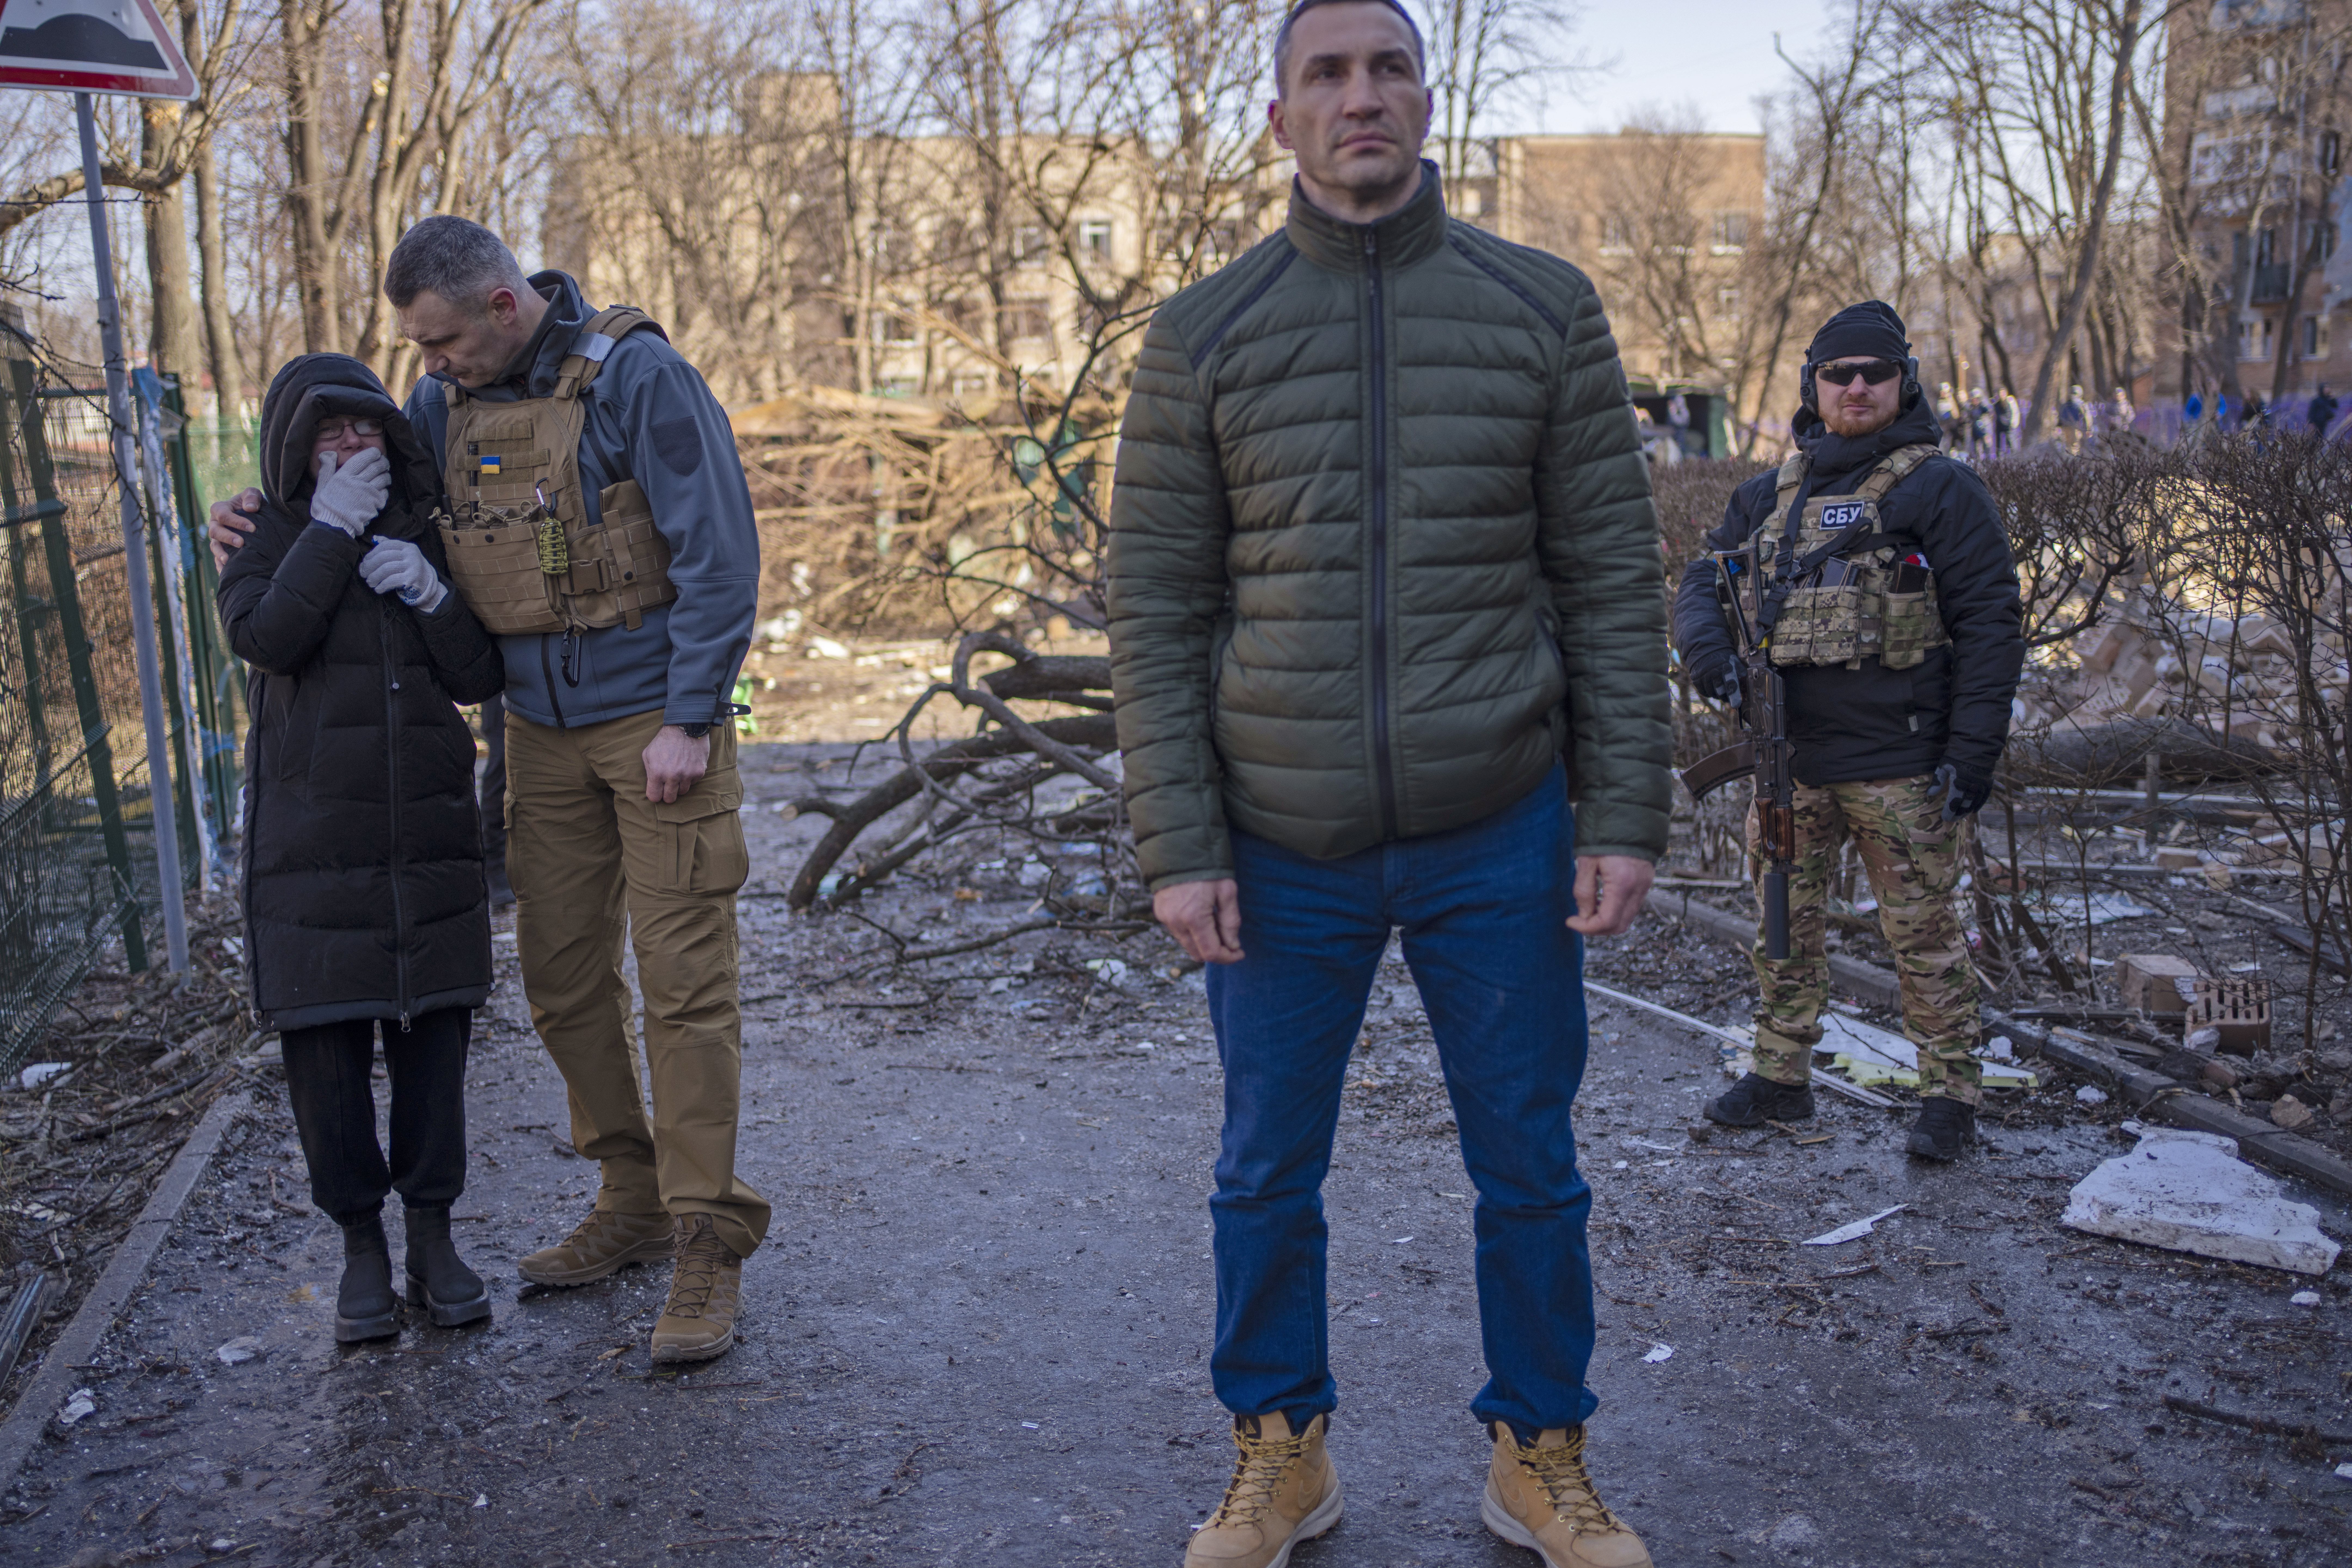 Russia Ukraine War Kievs's Mayor, Vitali Klitschko, left, conforts a neighbor who cries at the site where a bombing damaged residential buildings in Kyiv, Ukraine, Friday, March 18, 2022. Russian forces pressed their assault on Ukrainian cities Friday, with new missile strikes and shelling on the edges of the capital Kyiv and the western city of Lviv, as world leaders pushed for an investigation of the Kremlin's repeated attacks on civilian targets, including schools, hospitals and residential areas